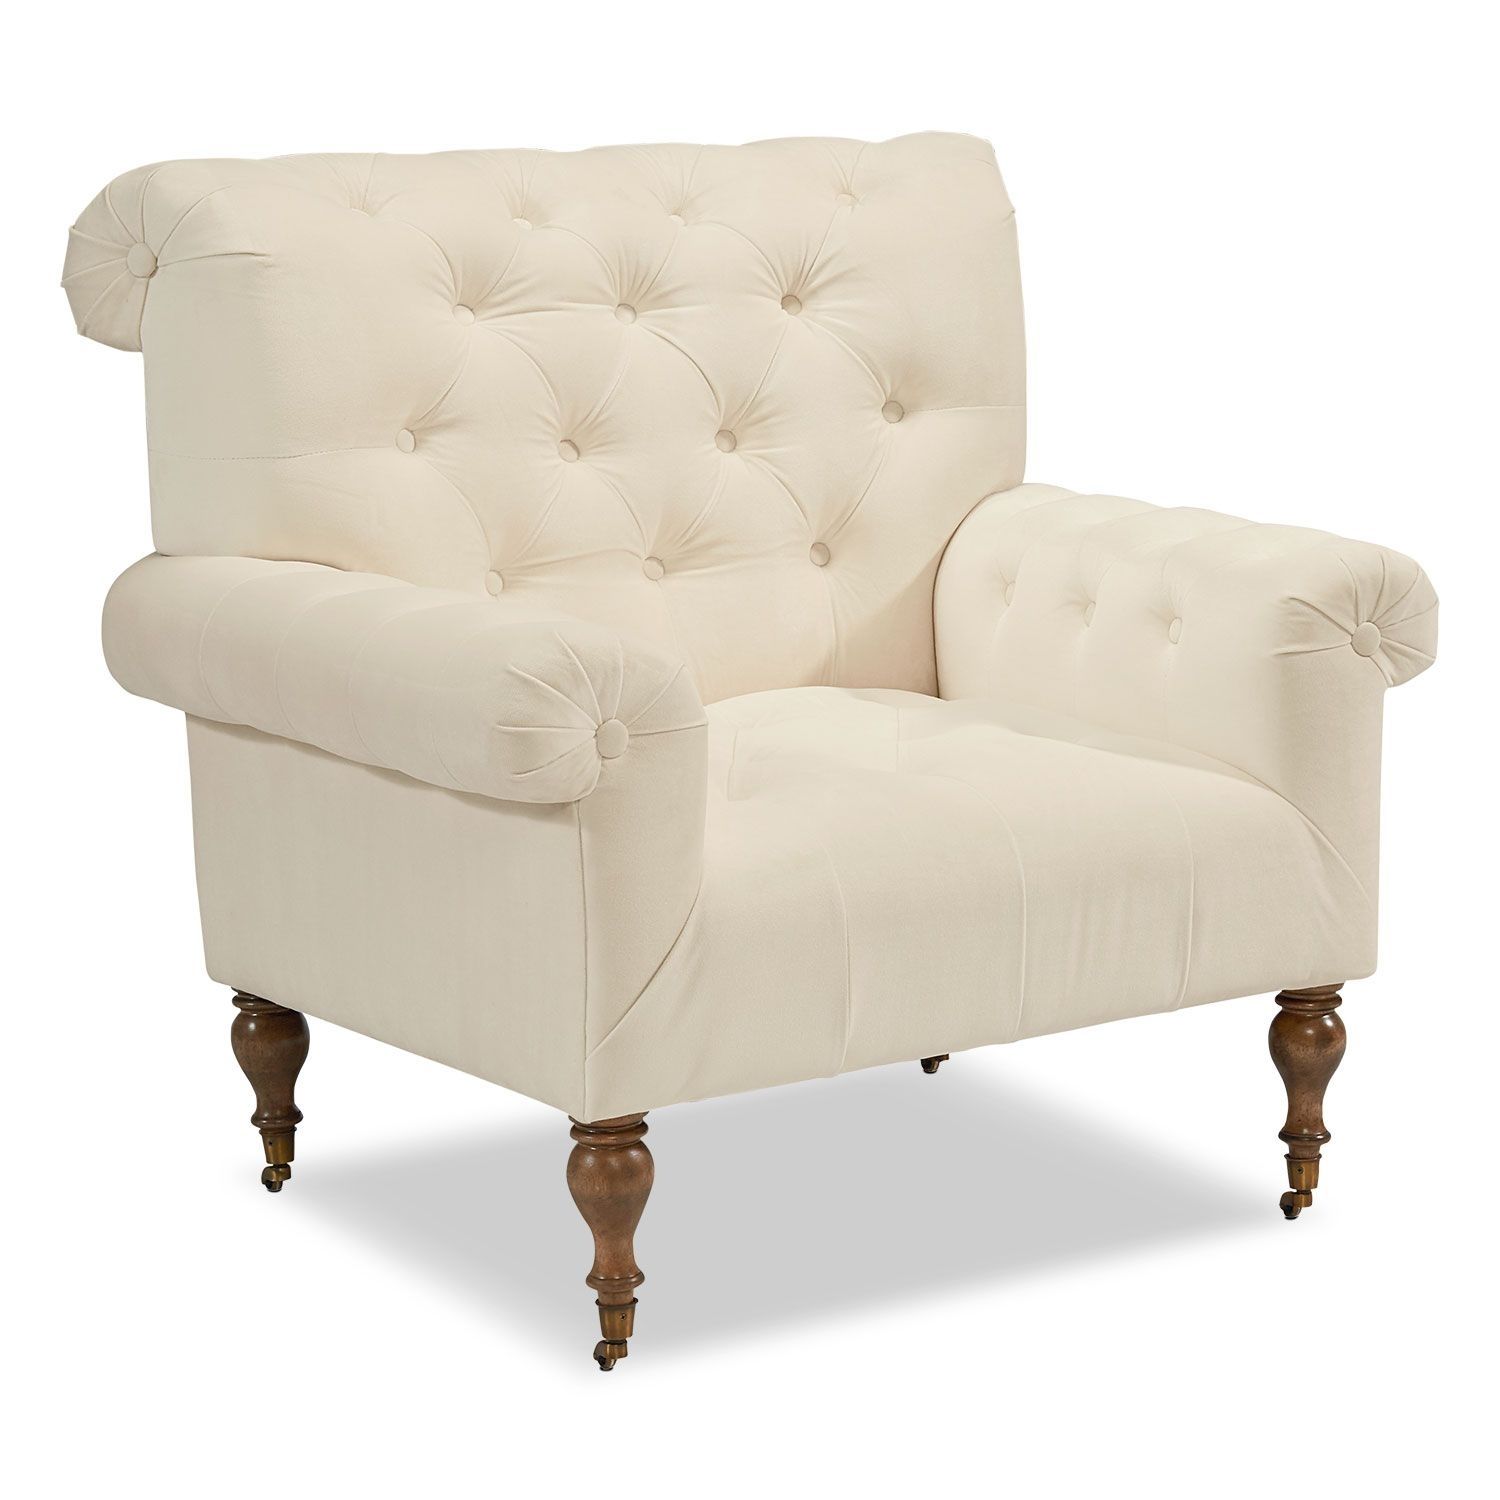 Magnolia Home Revival Arm Chairs Regarding Most Recently Released Joanna Gaines Magnolia Home Furniture Lin  Carpe Diem Accent Chair (View 16 of 20)